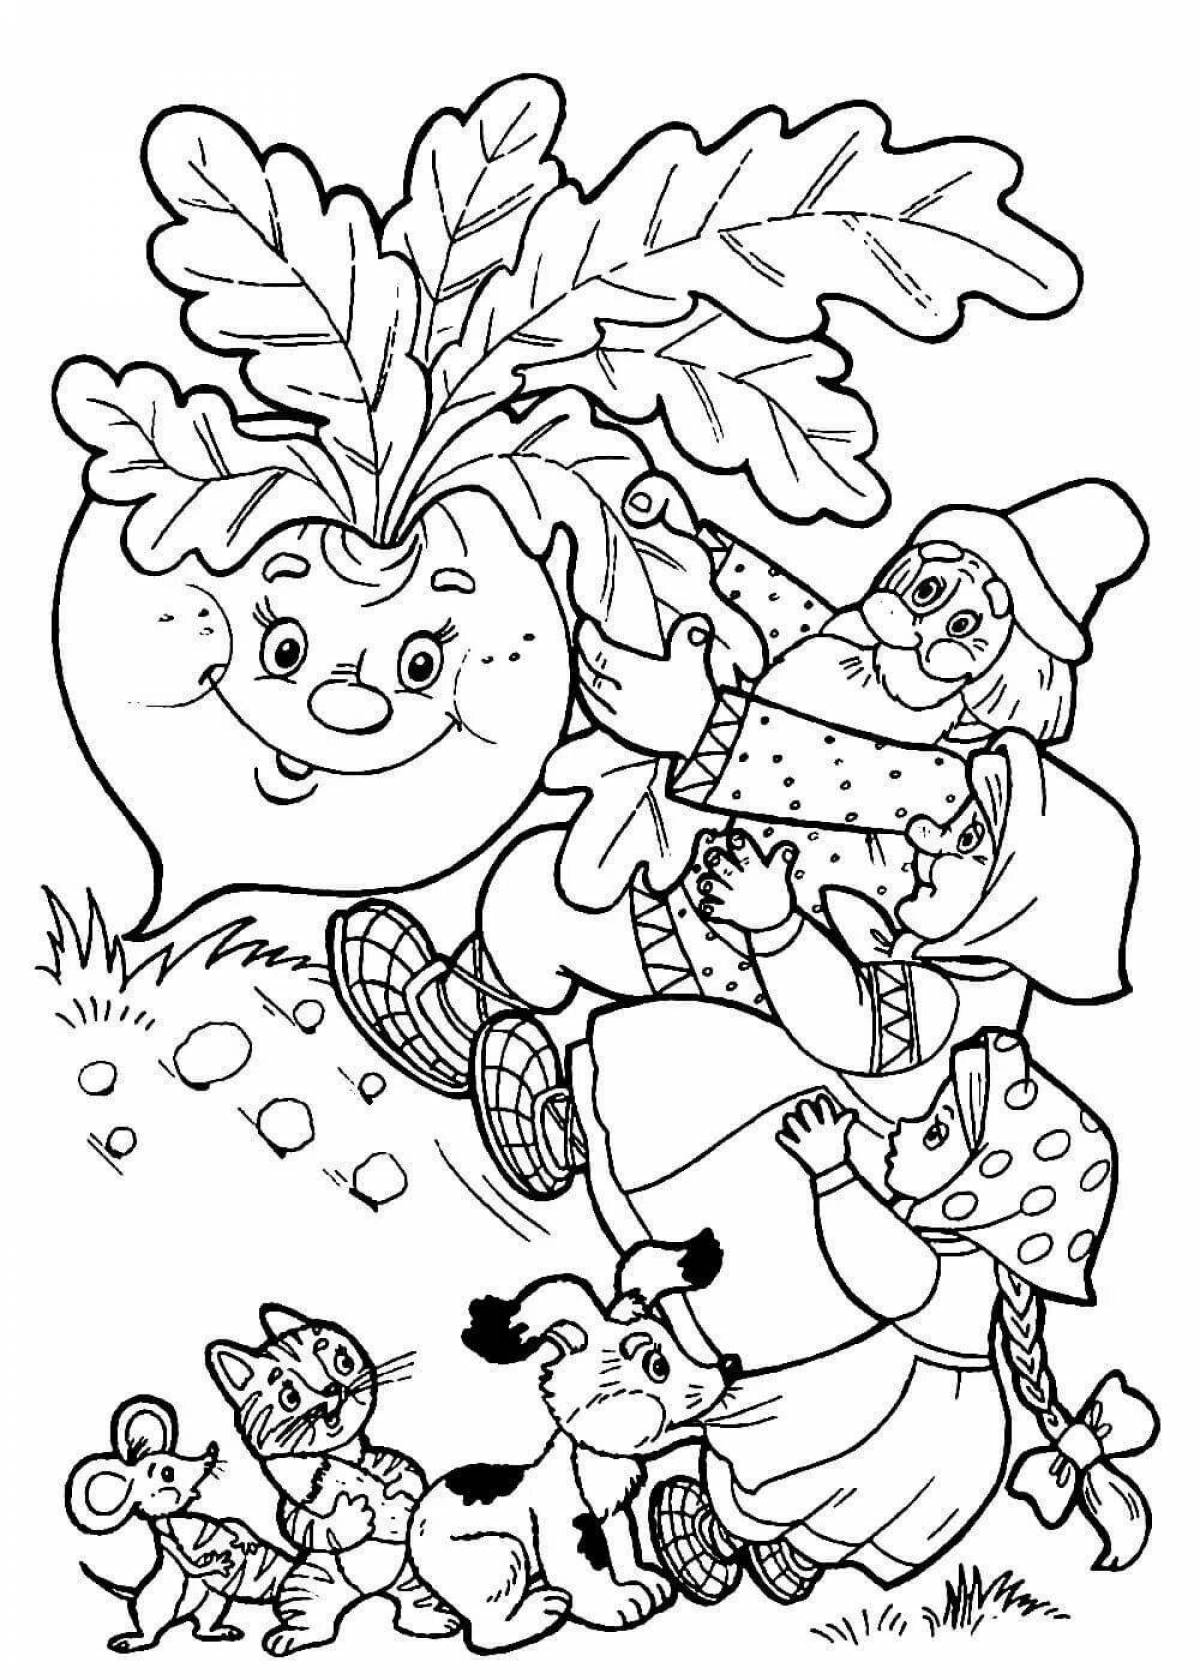 Fantastic coloring book with heroes of Russian fairy tales